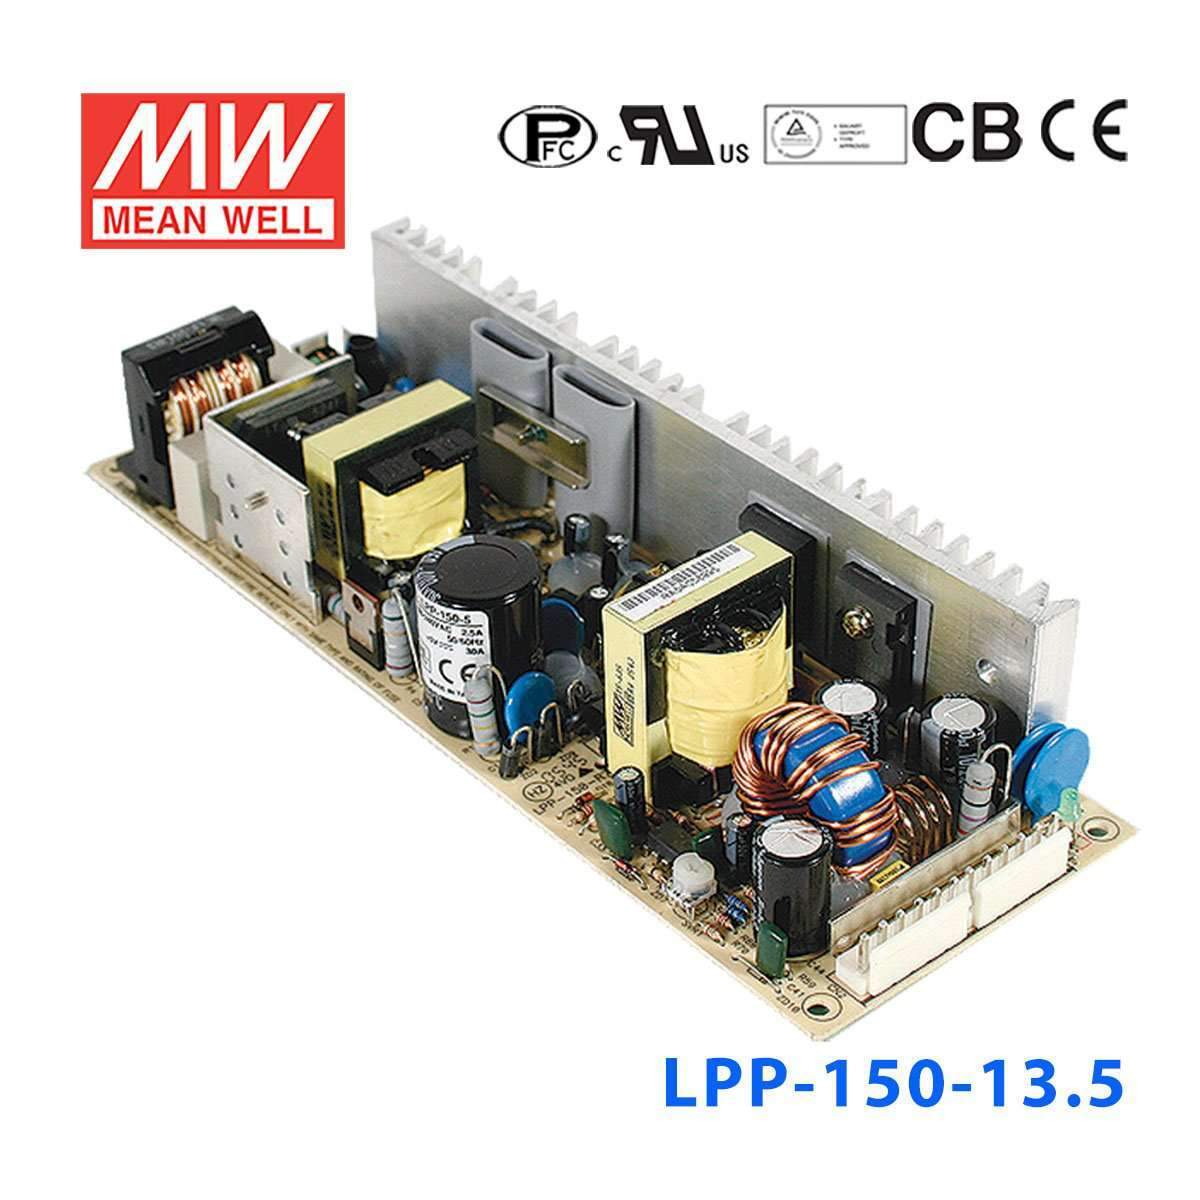 Mean Well LPP-150-13.5 Power Supply 151W 13.5V